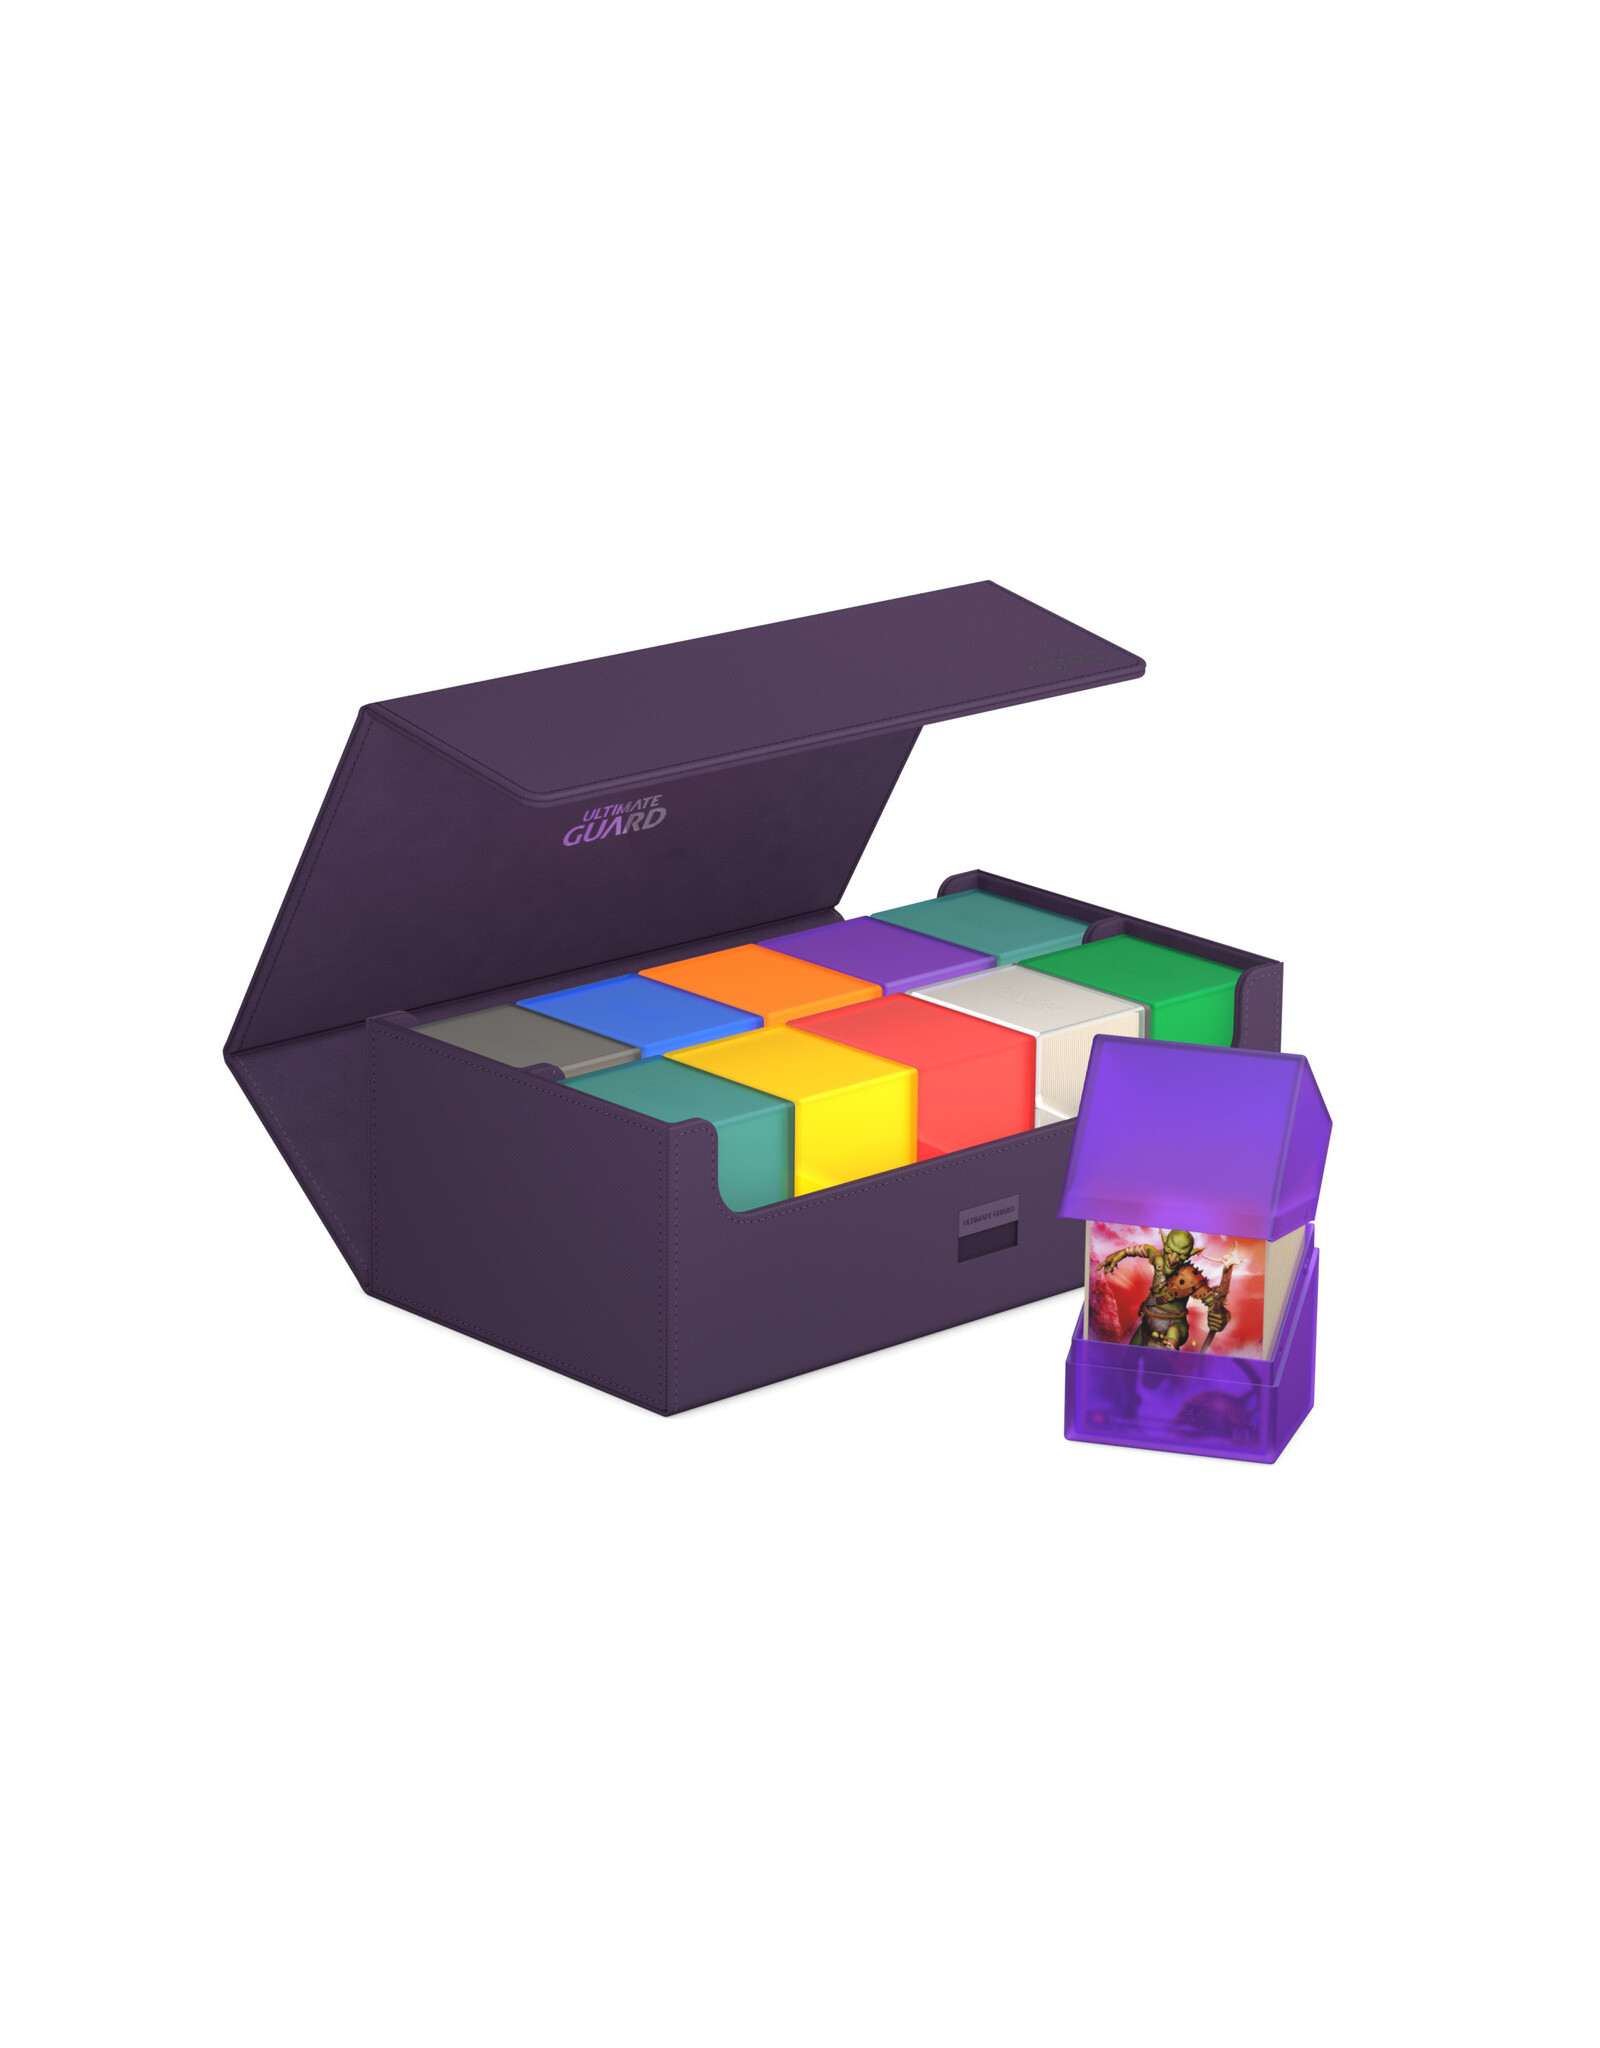 Ultimate Guard Arkhive Trading Card Storage (Purple, 800+)